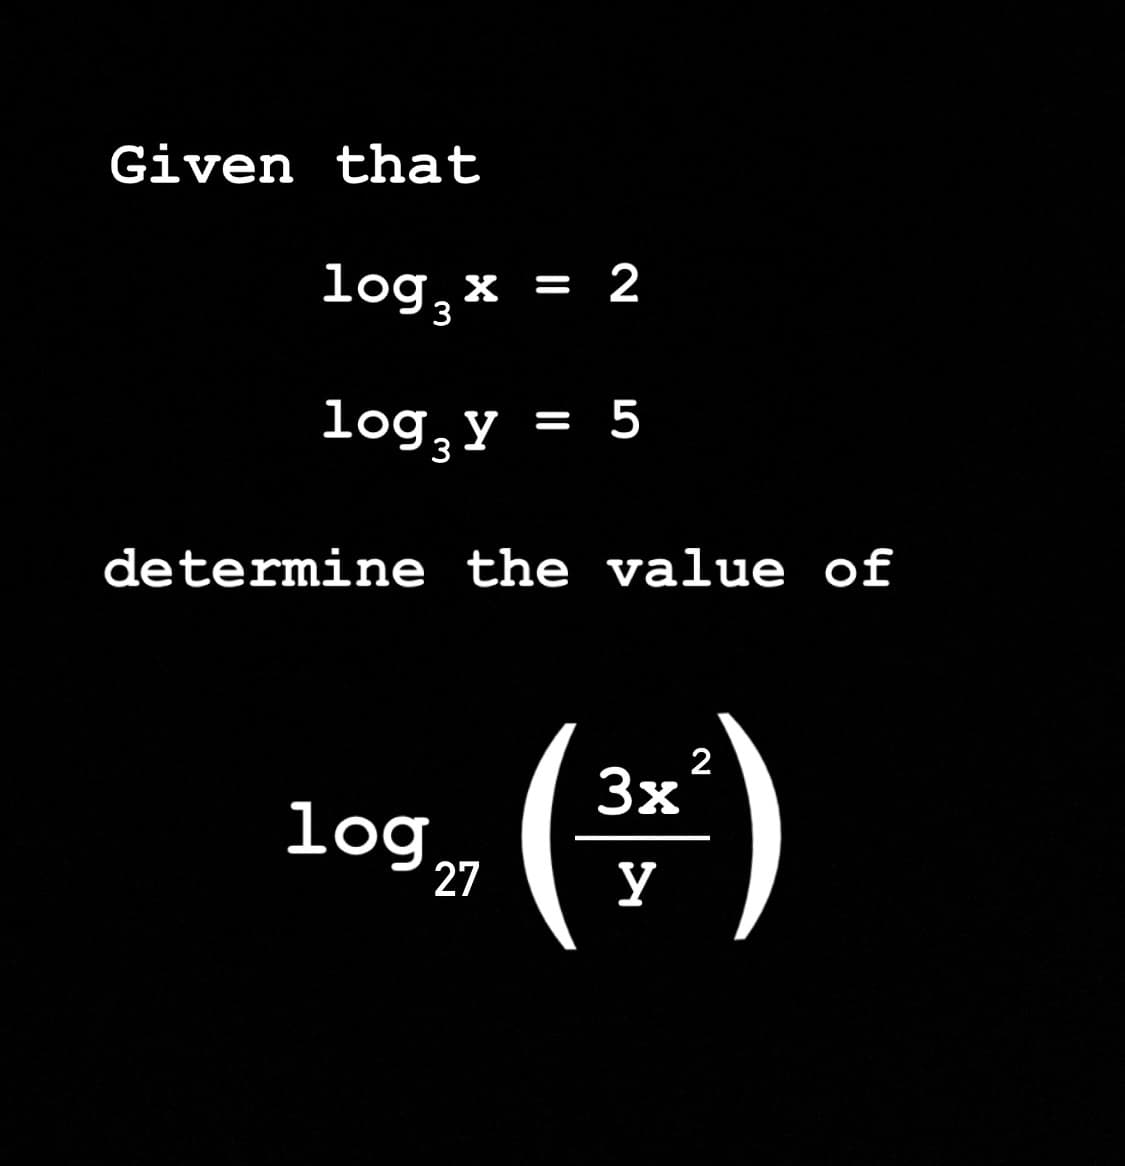 Given that
log¸× = 2
3
log, Y
= 5
3
determine the value of
log
109 27
2
(주)